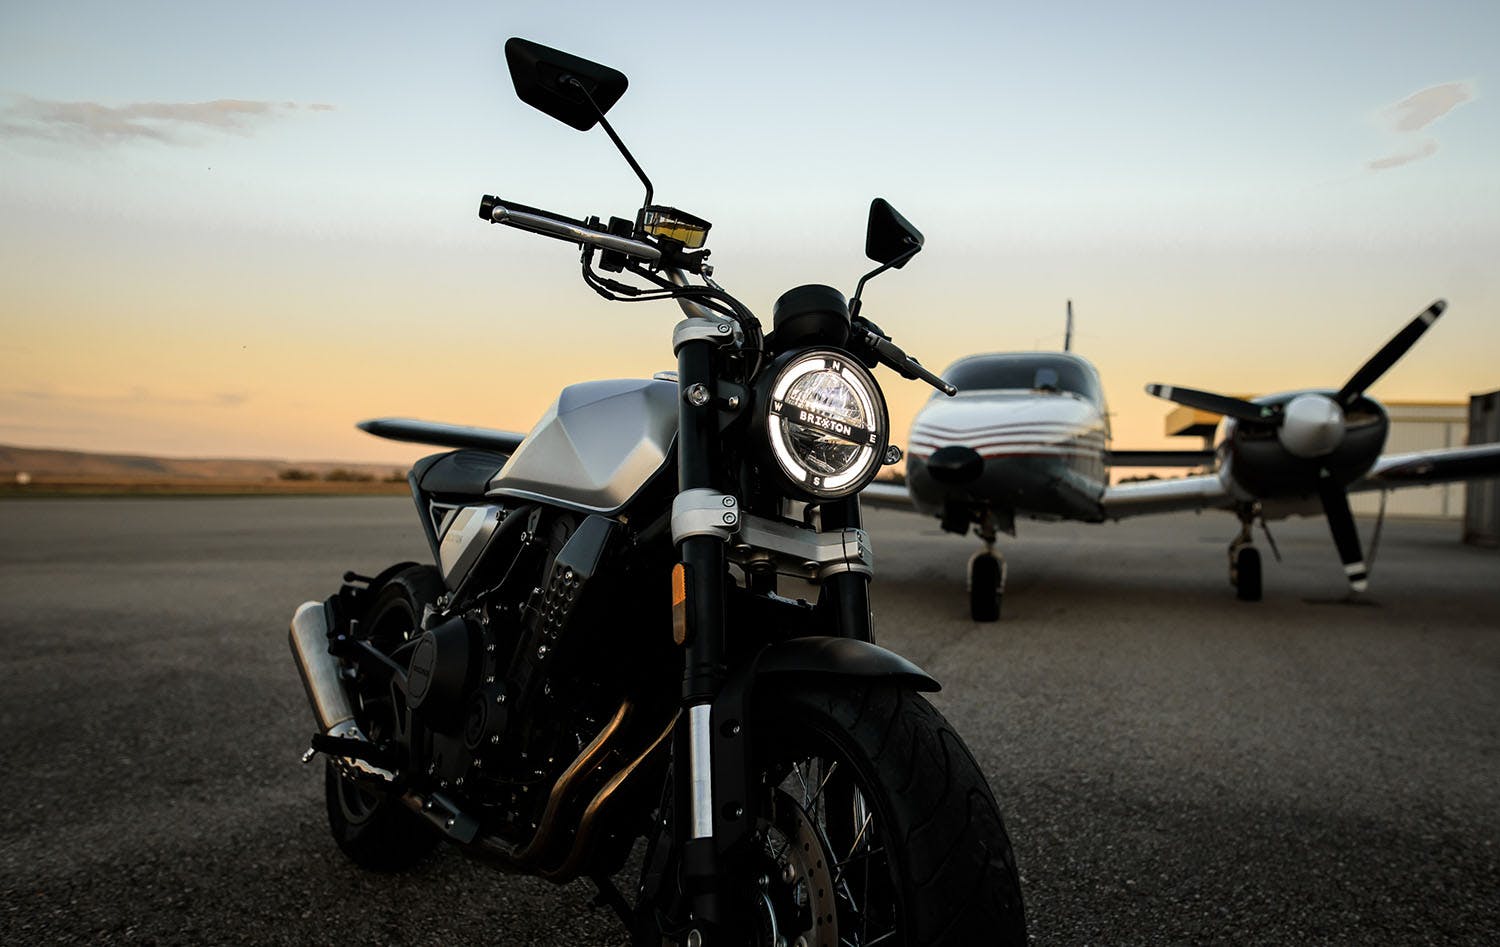 Brixton Crossfire 500 X in Backstage Black on an airfield in front of an aeroplane